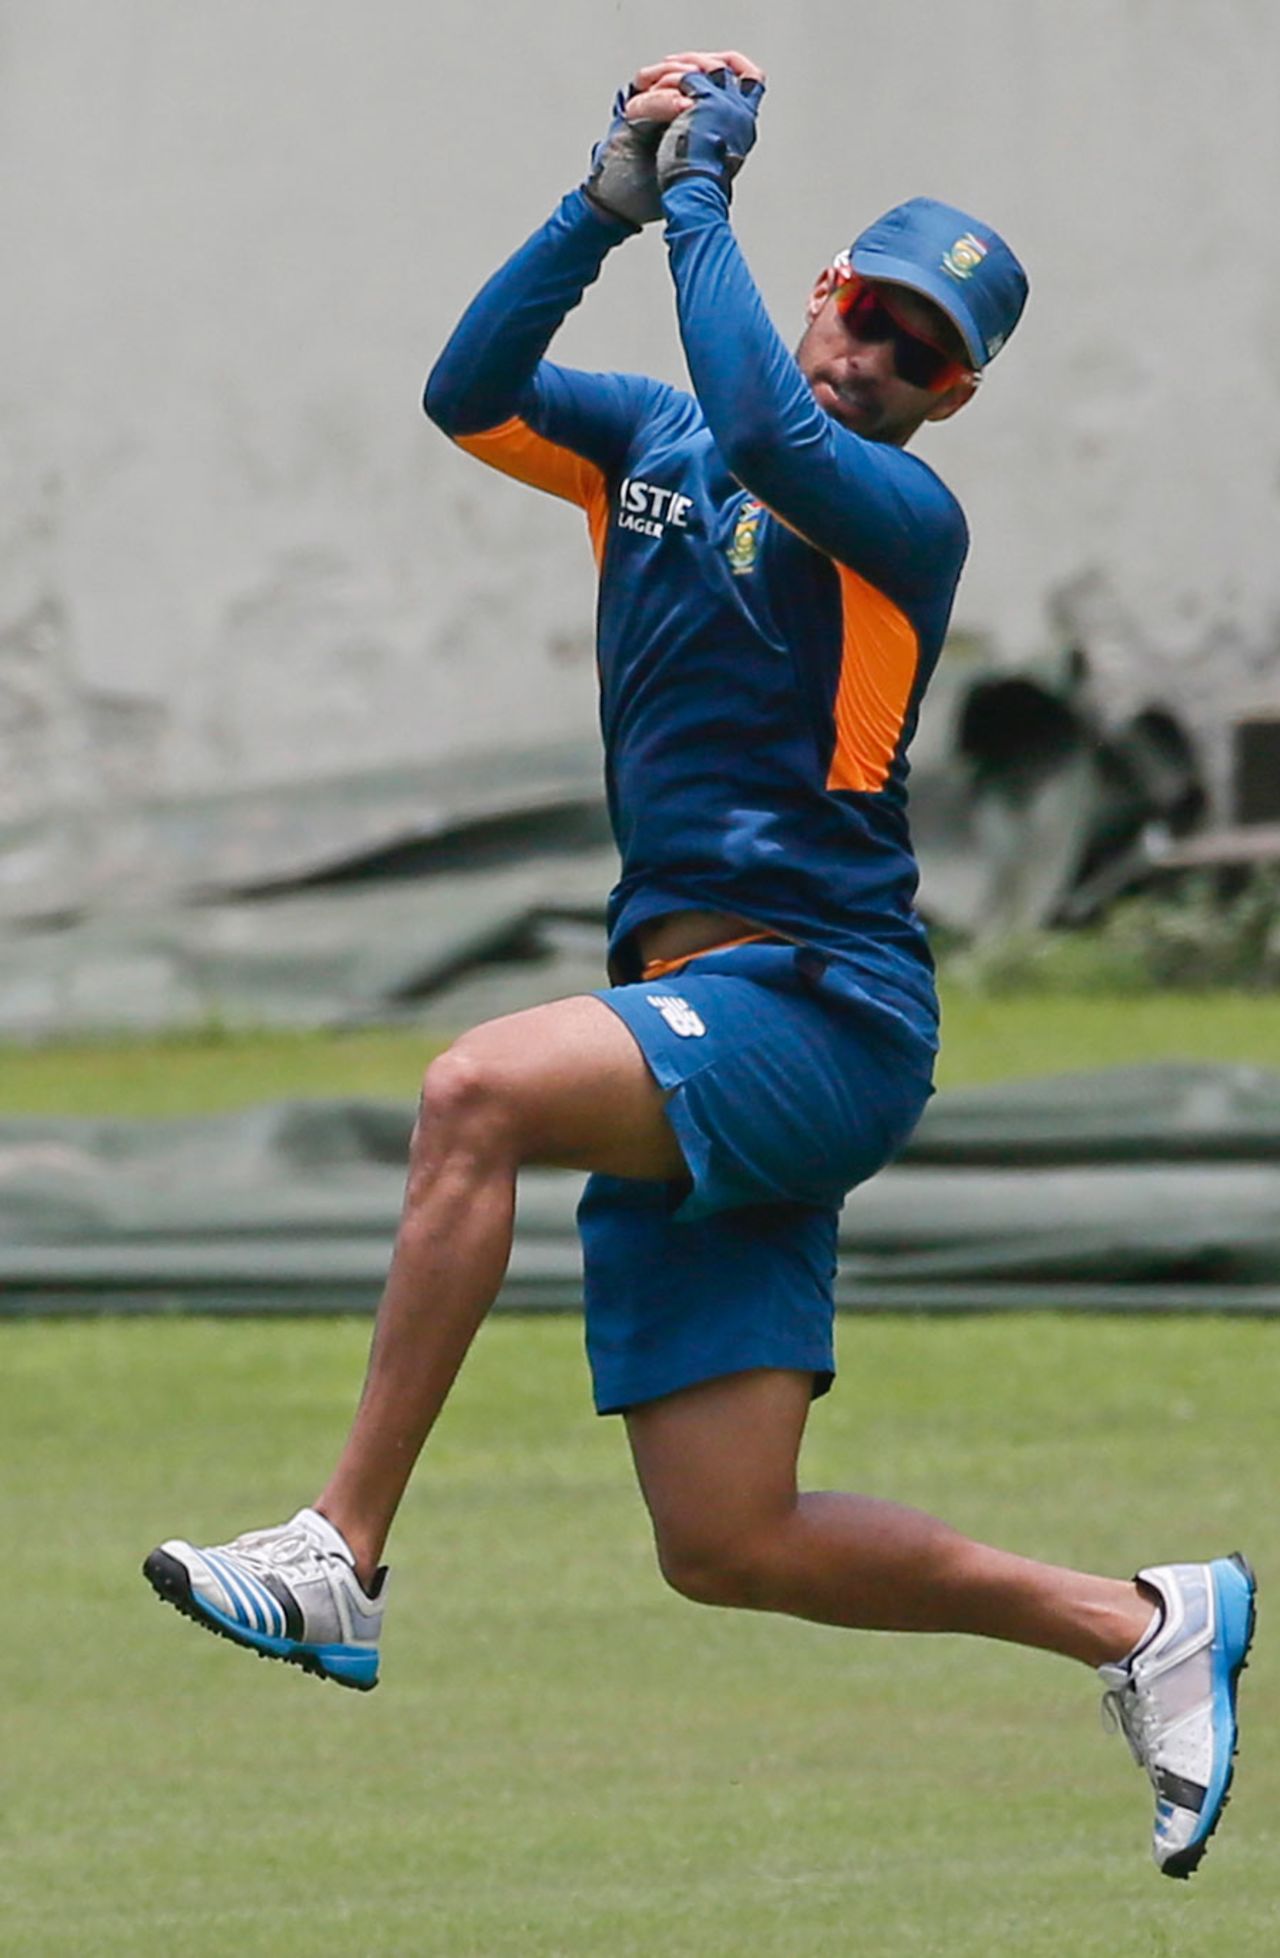 JP Duminy takes a catch during training, Dhaka, July 28, 2015